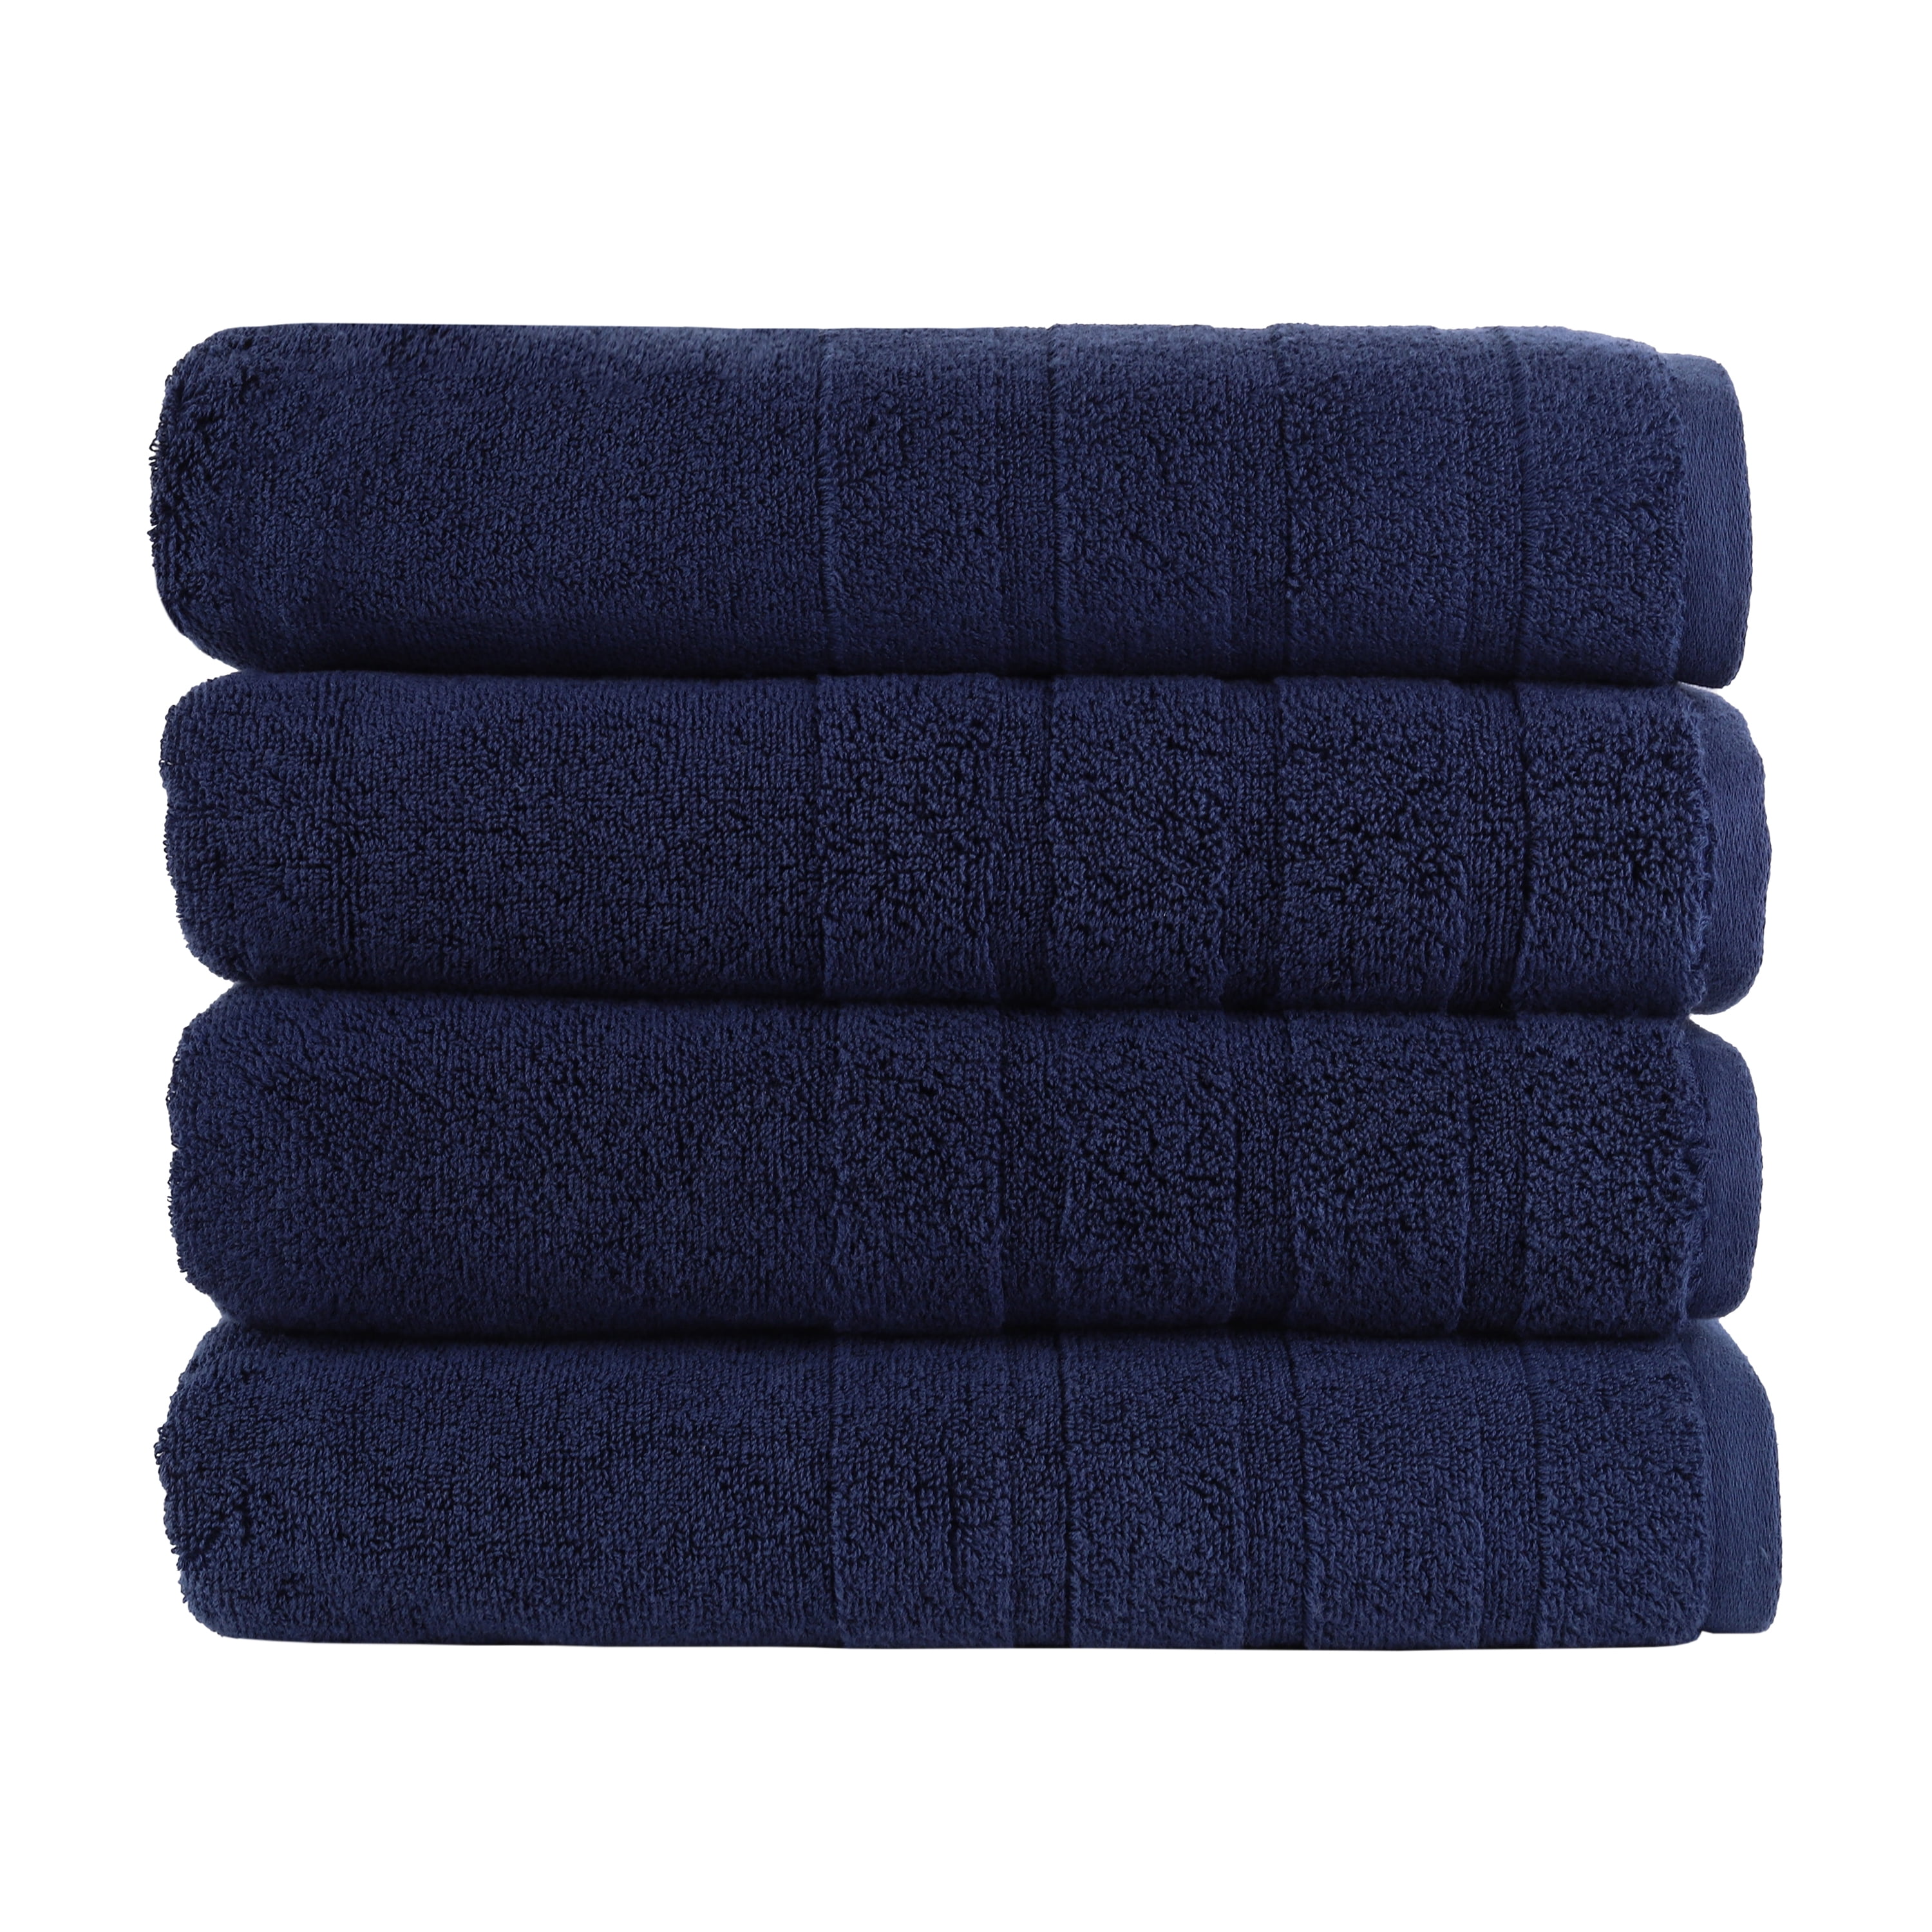 American Heritage by 1888 Mills - Luxury 4-Piece Bath Towel Set-Made with US and Imported Cotton, Grey Pumice, Size: 30 x 56